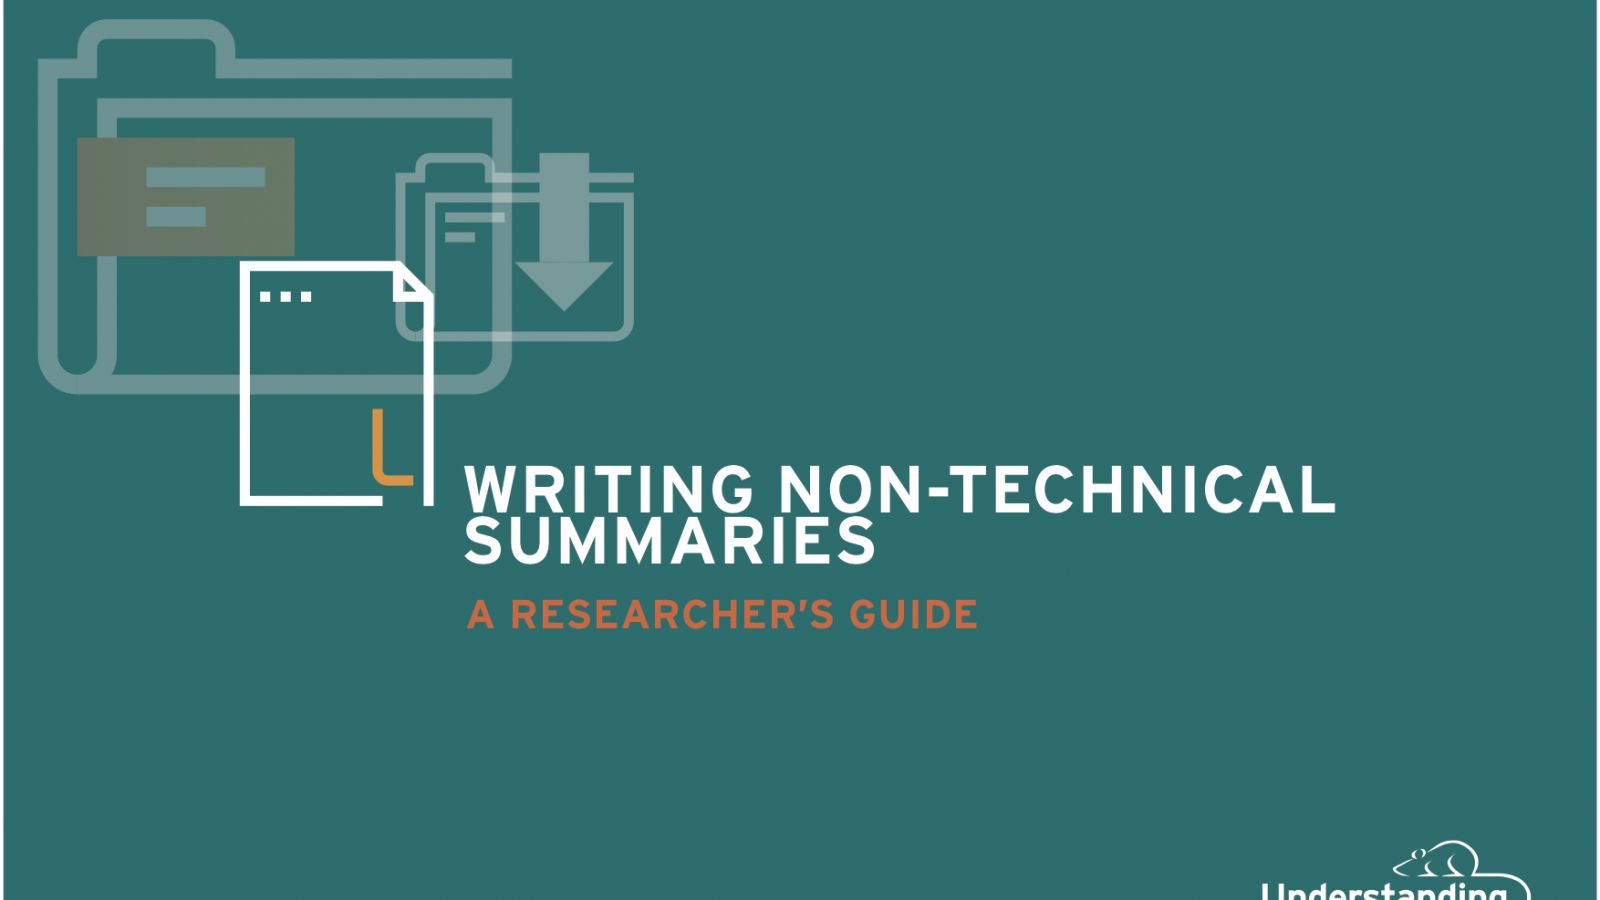 Guide to writing non-technical summaries